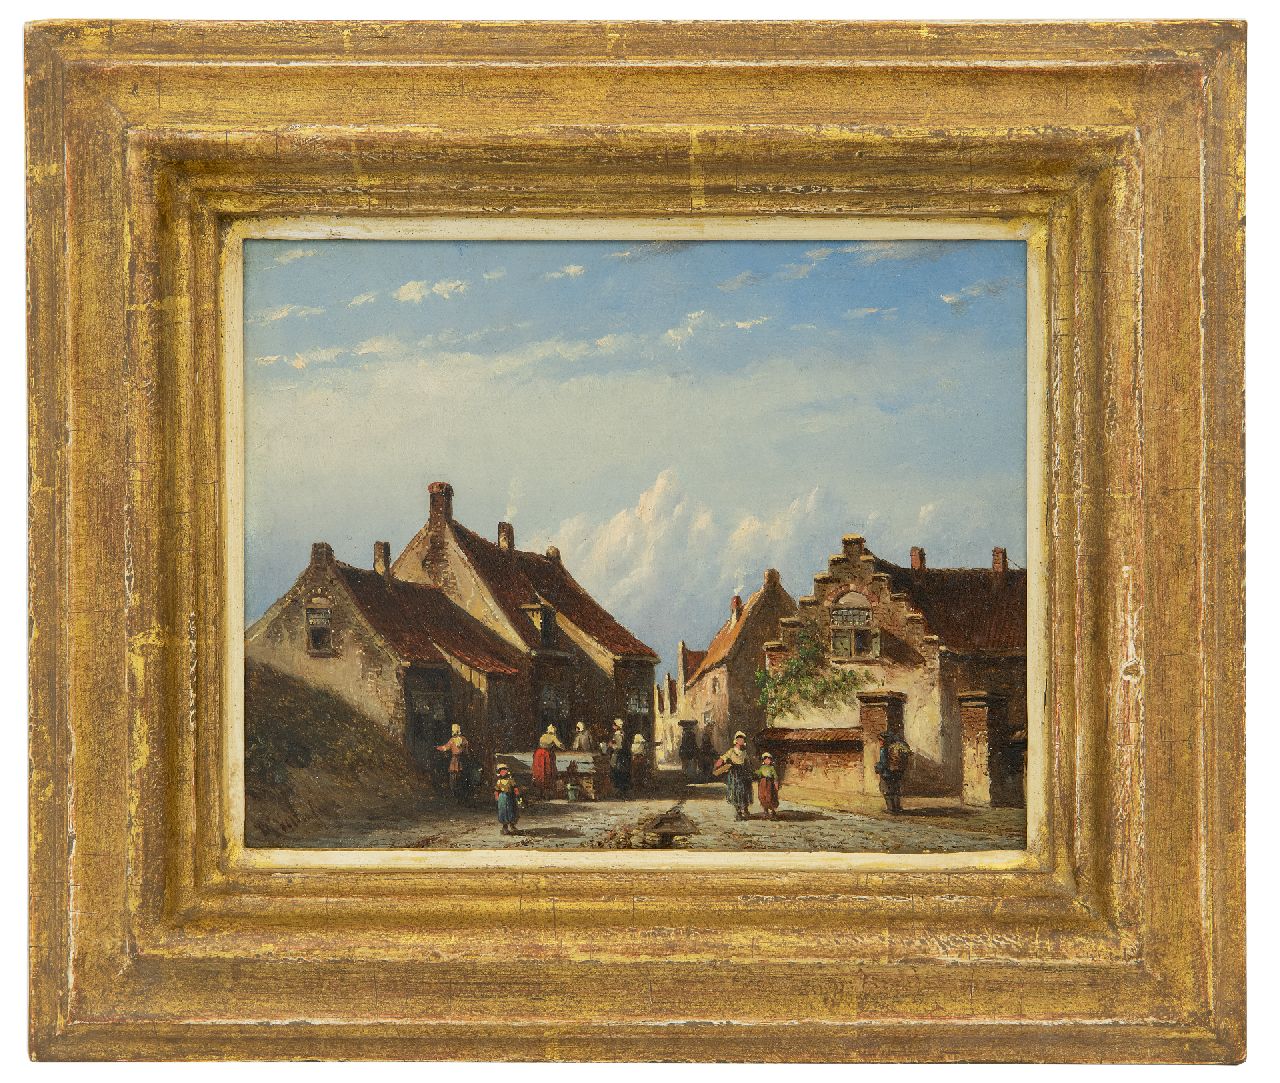 Vertin P.G.  | Petrus Gerardus Vertin | Paintings offered for sale | A village in the dunes in summer, oil on panel 14.8 x 18.8 cm, signed l.l. and dated '59